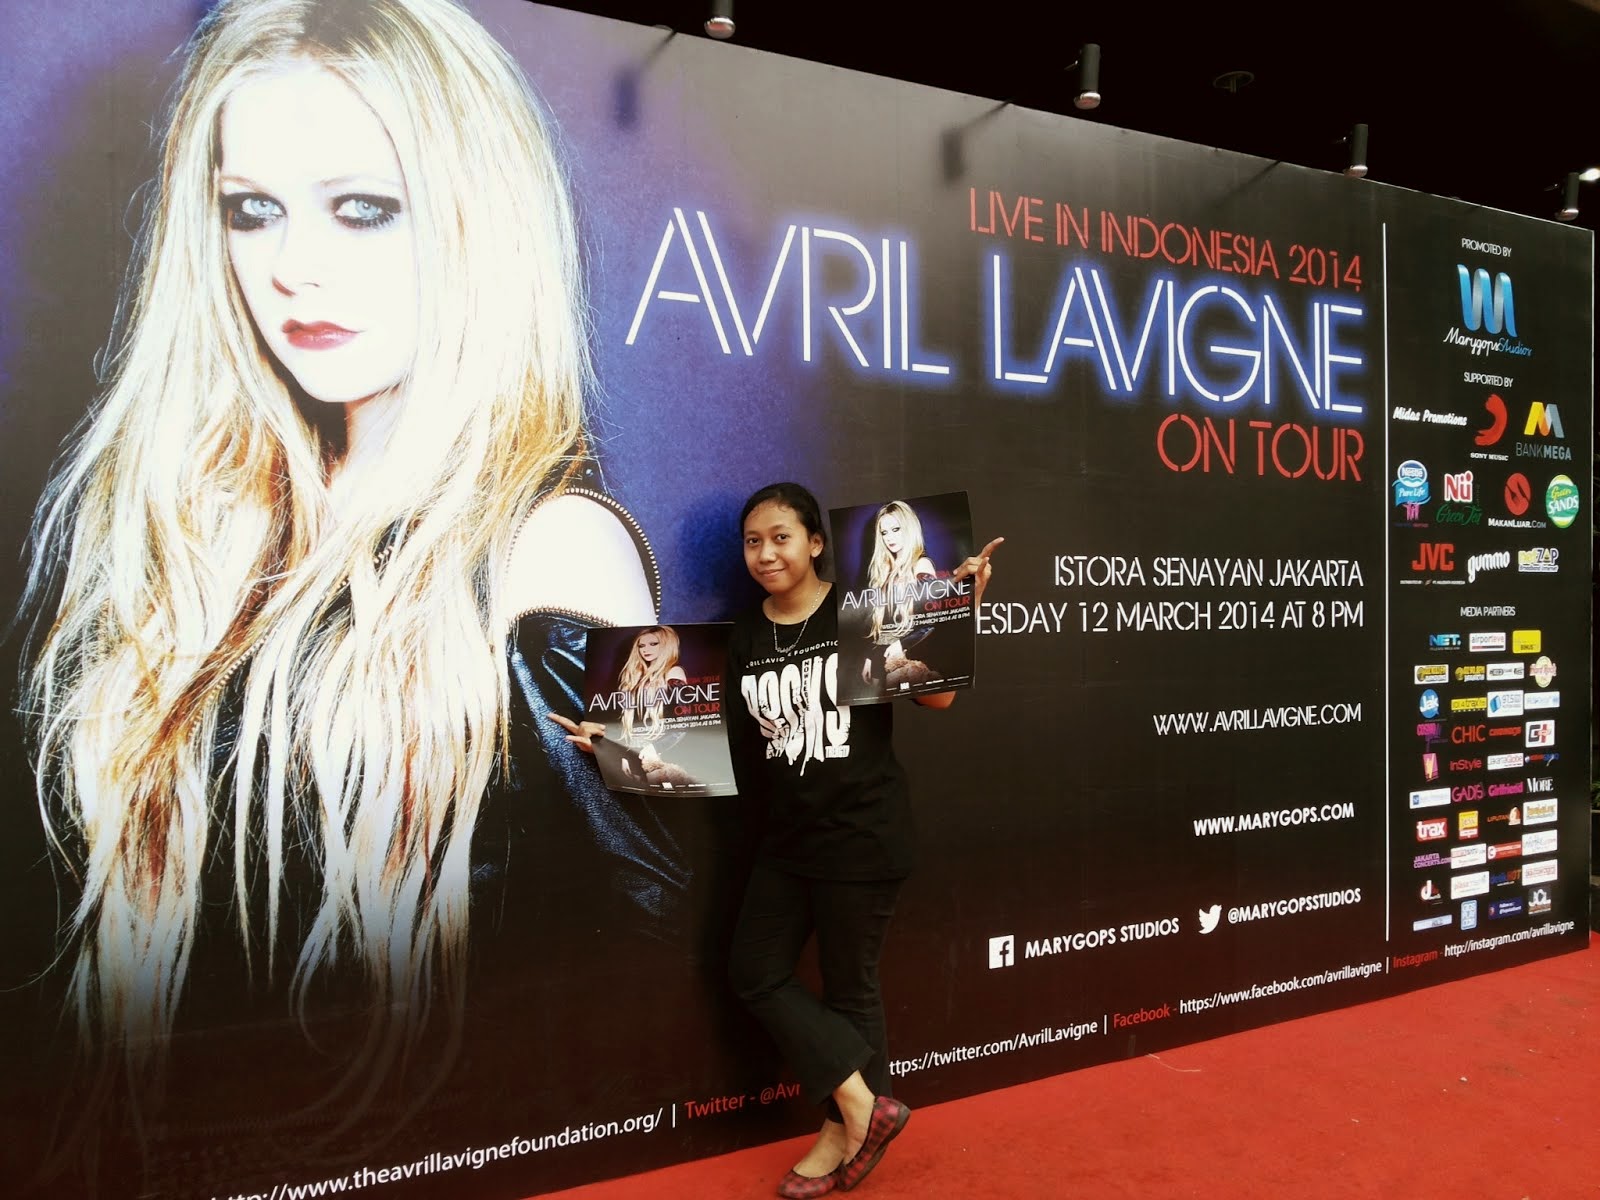 Me with Avril ;D